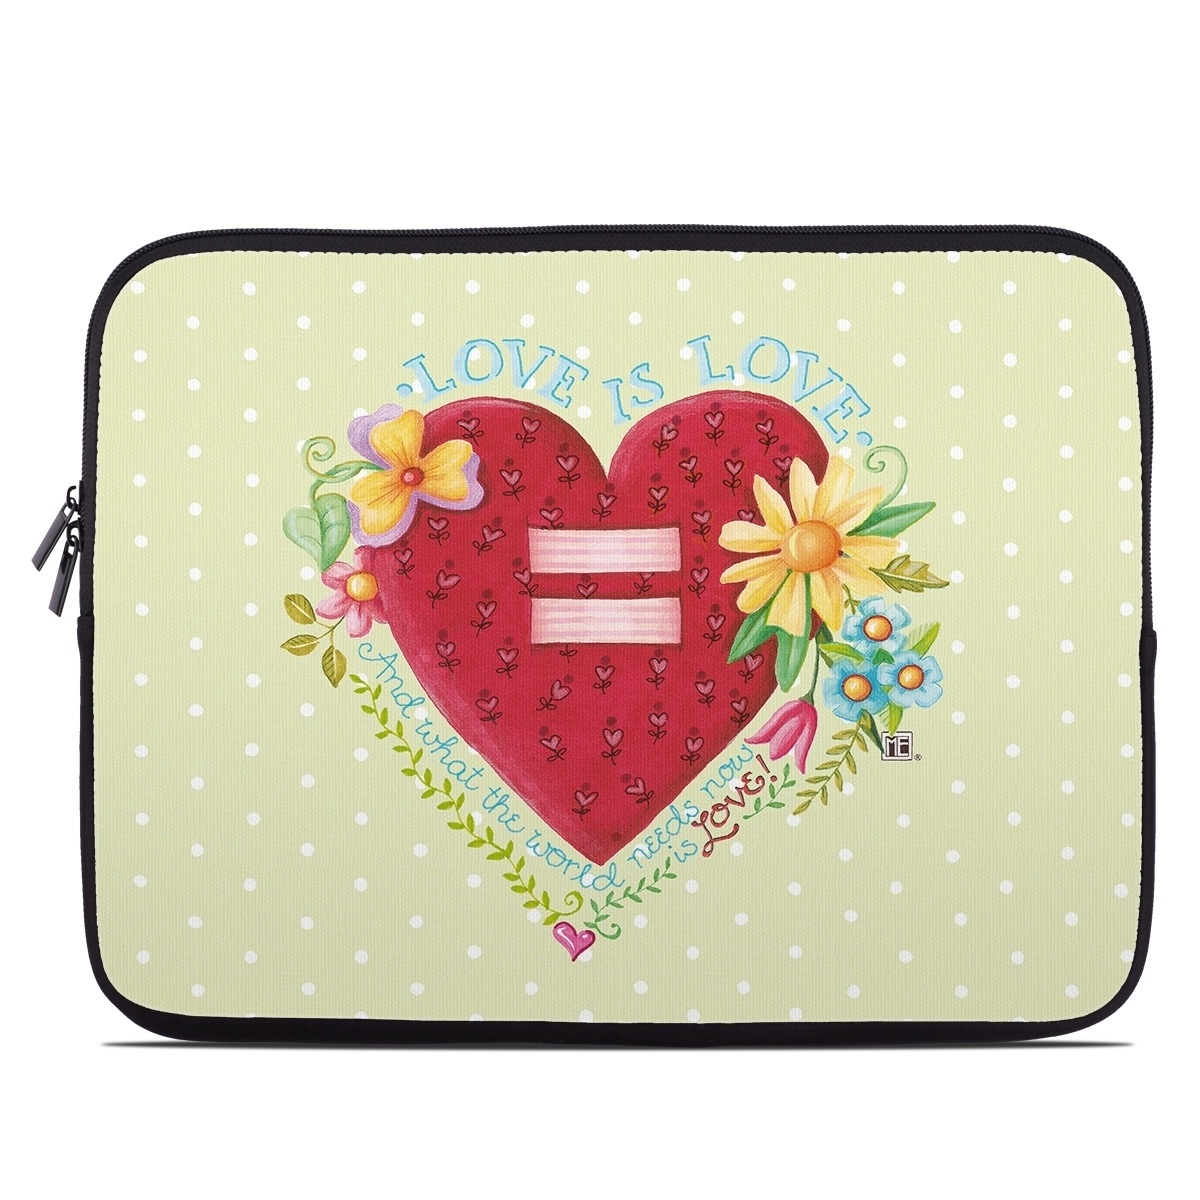 Laptop Sleeve - Love Is What We Need (Image 1)